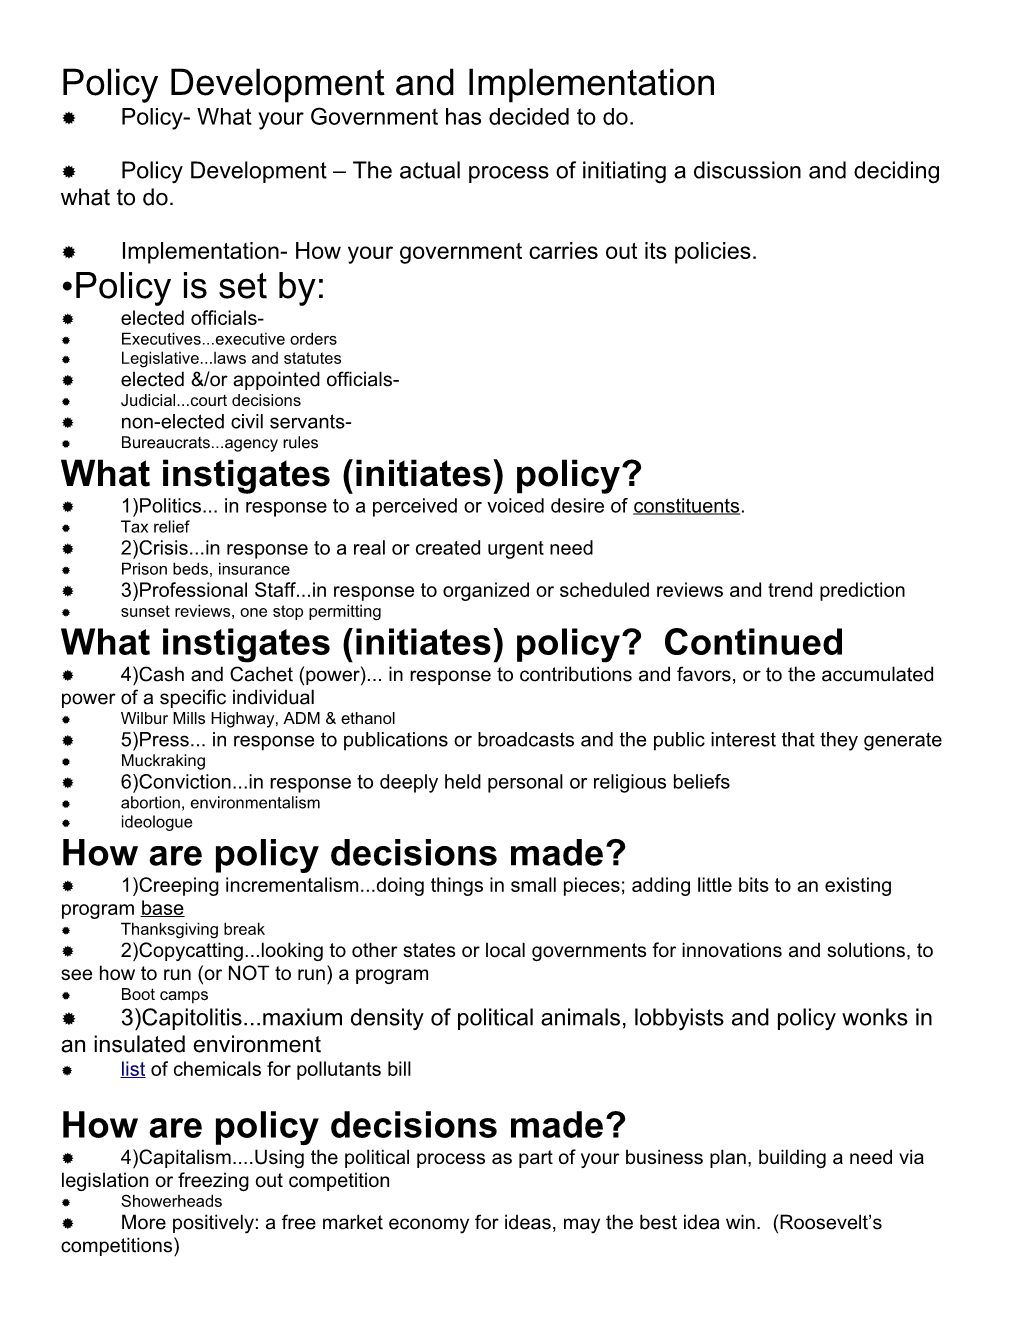 Policy Development and Implementation